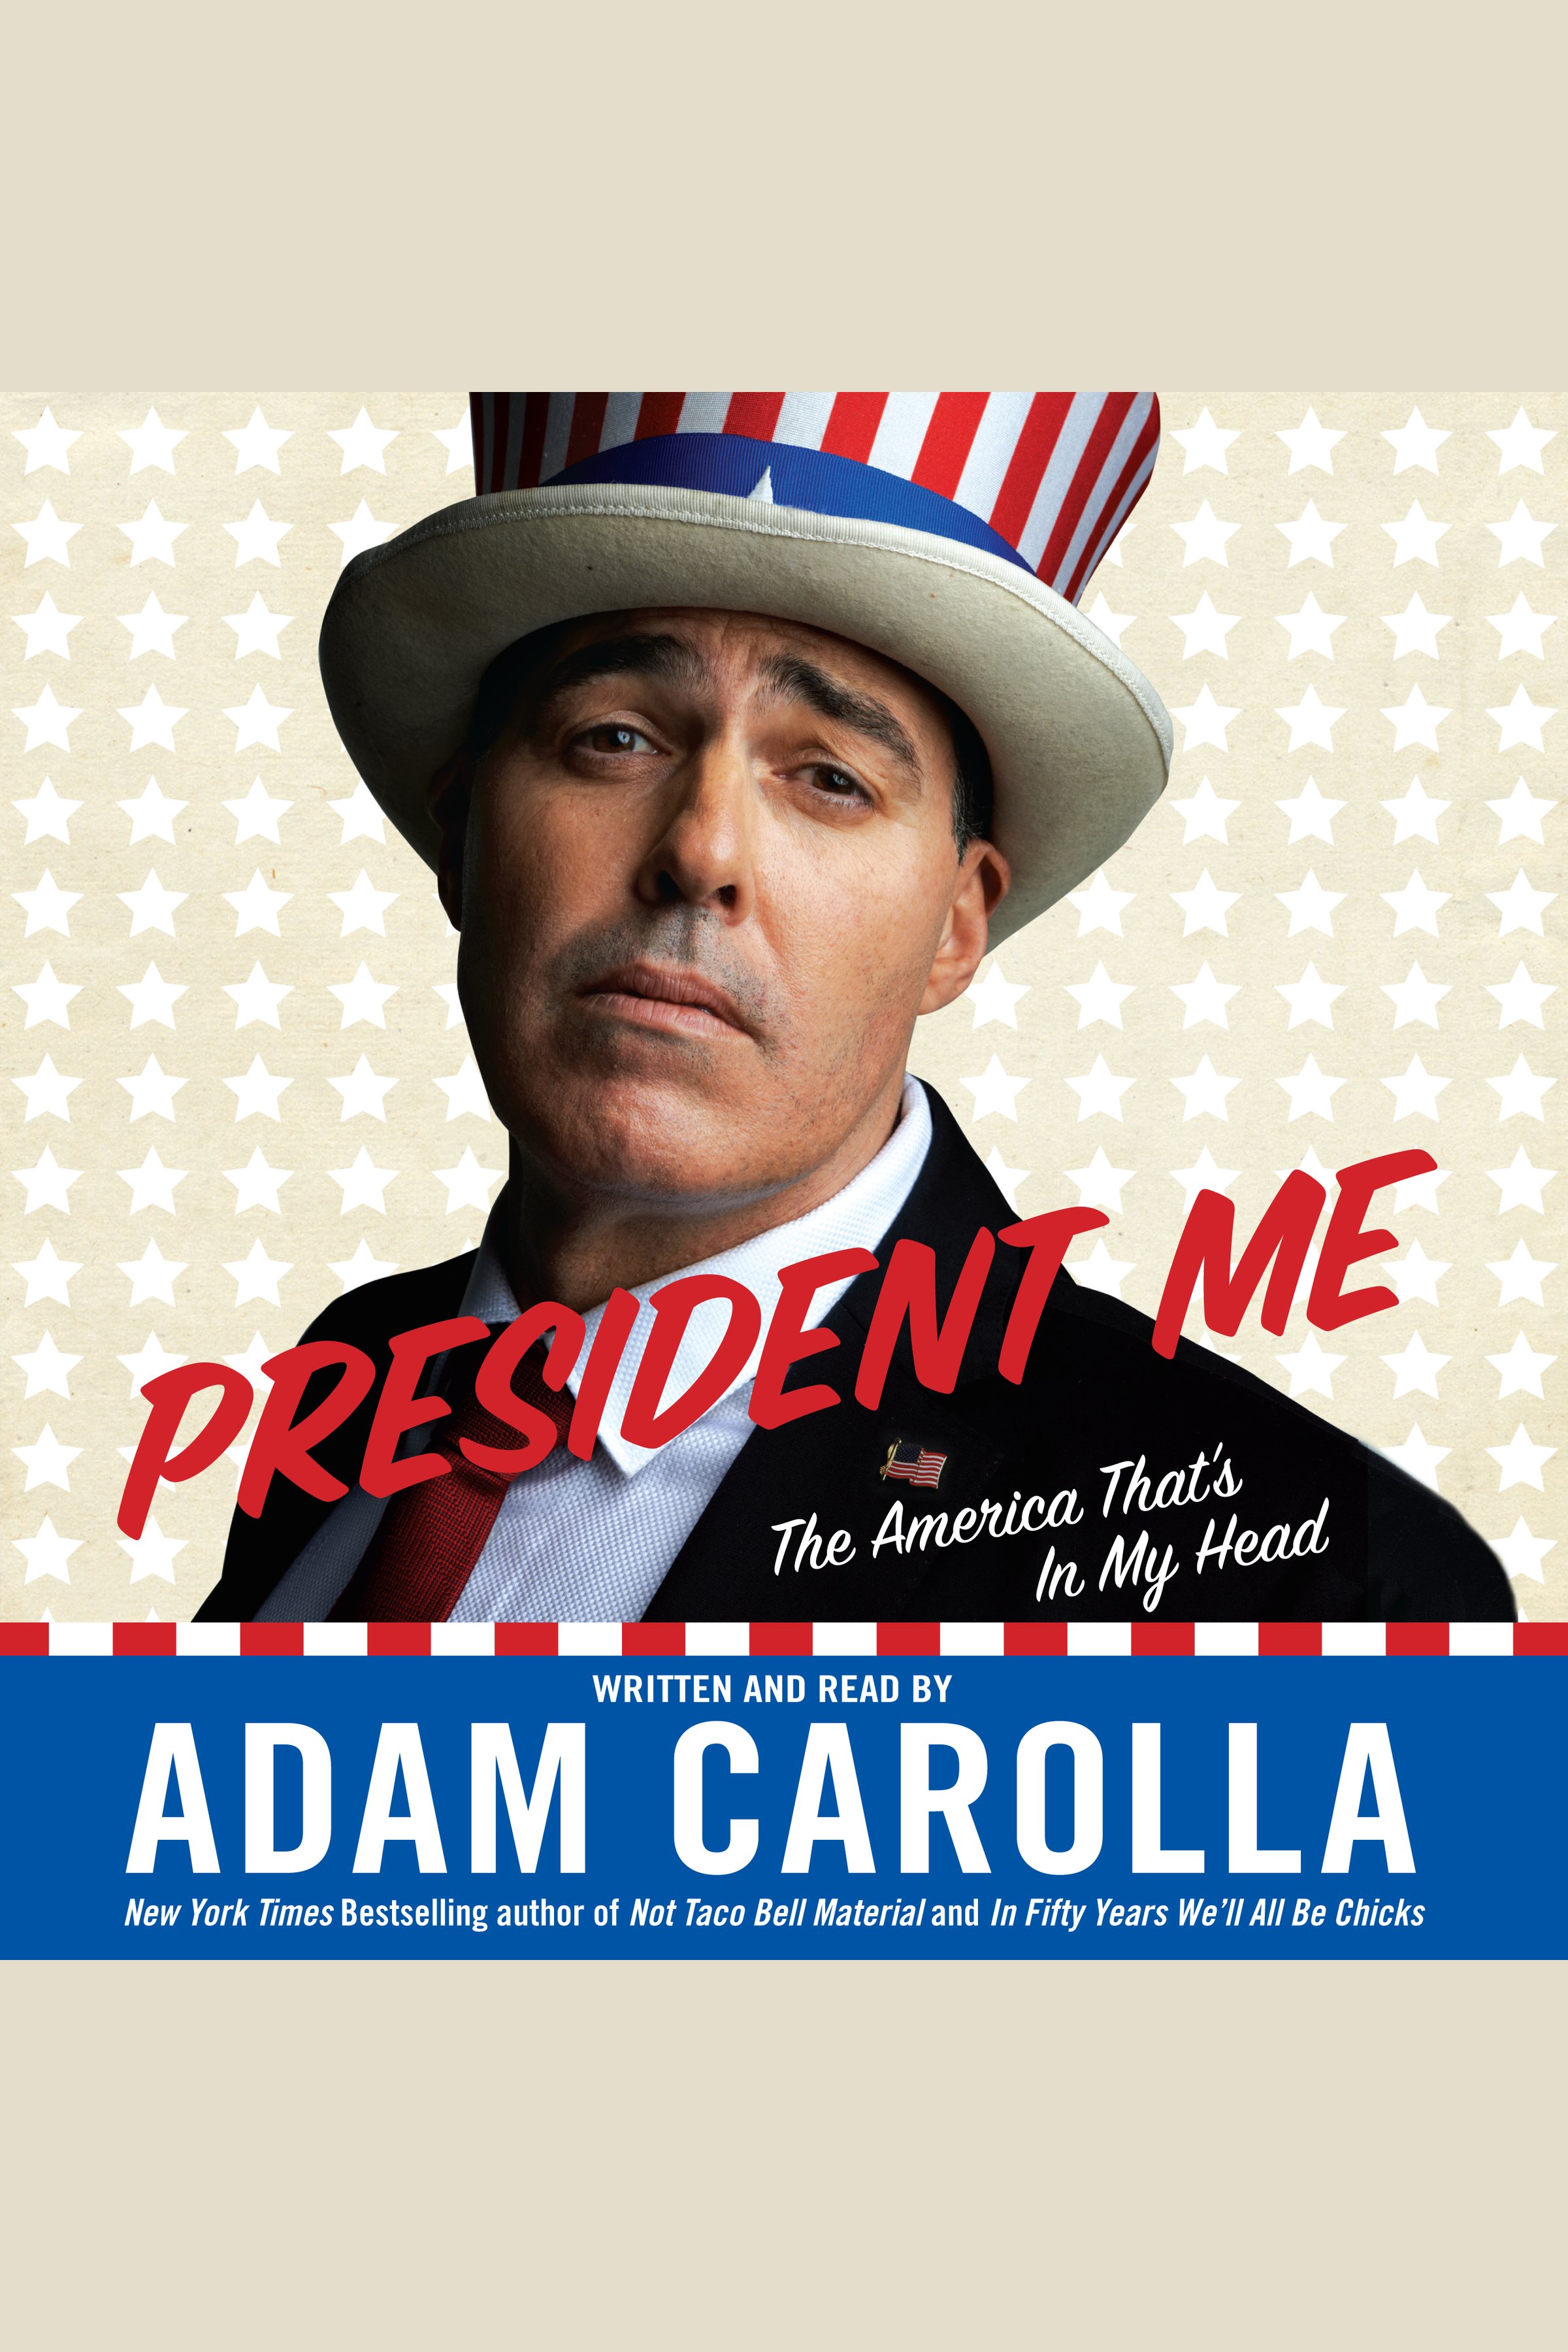 President me the America that's in my head cover image